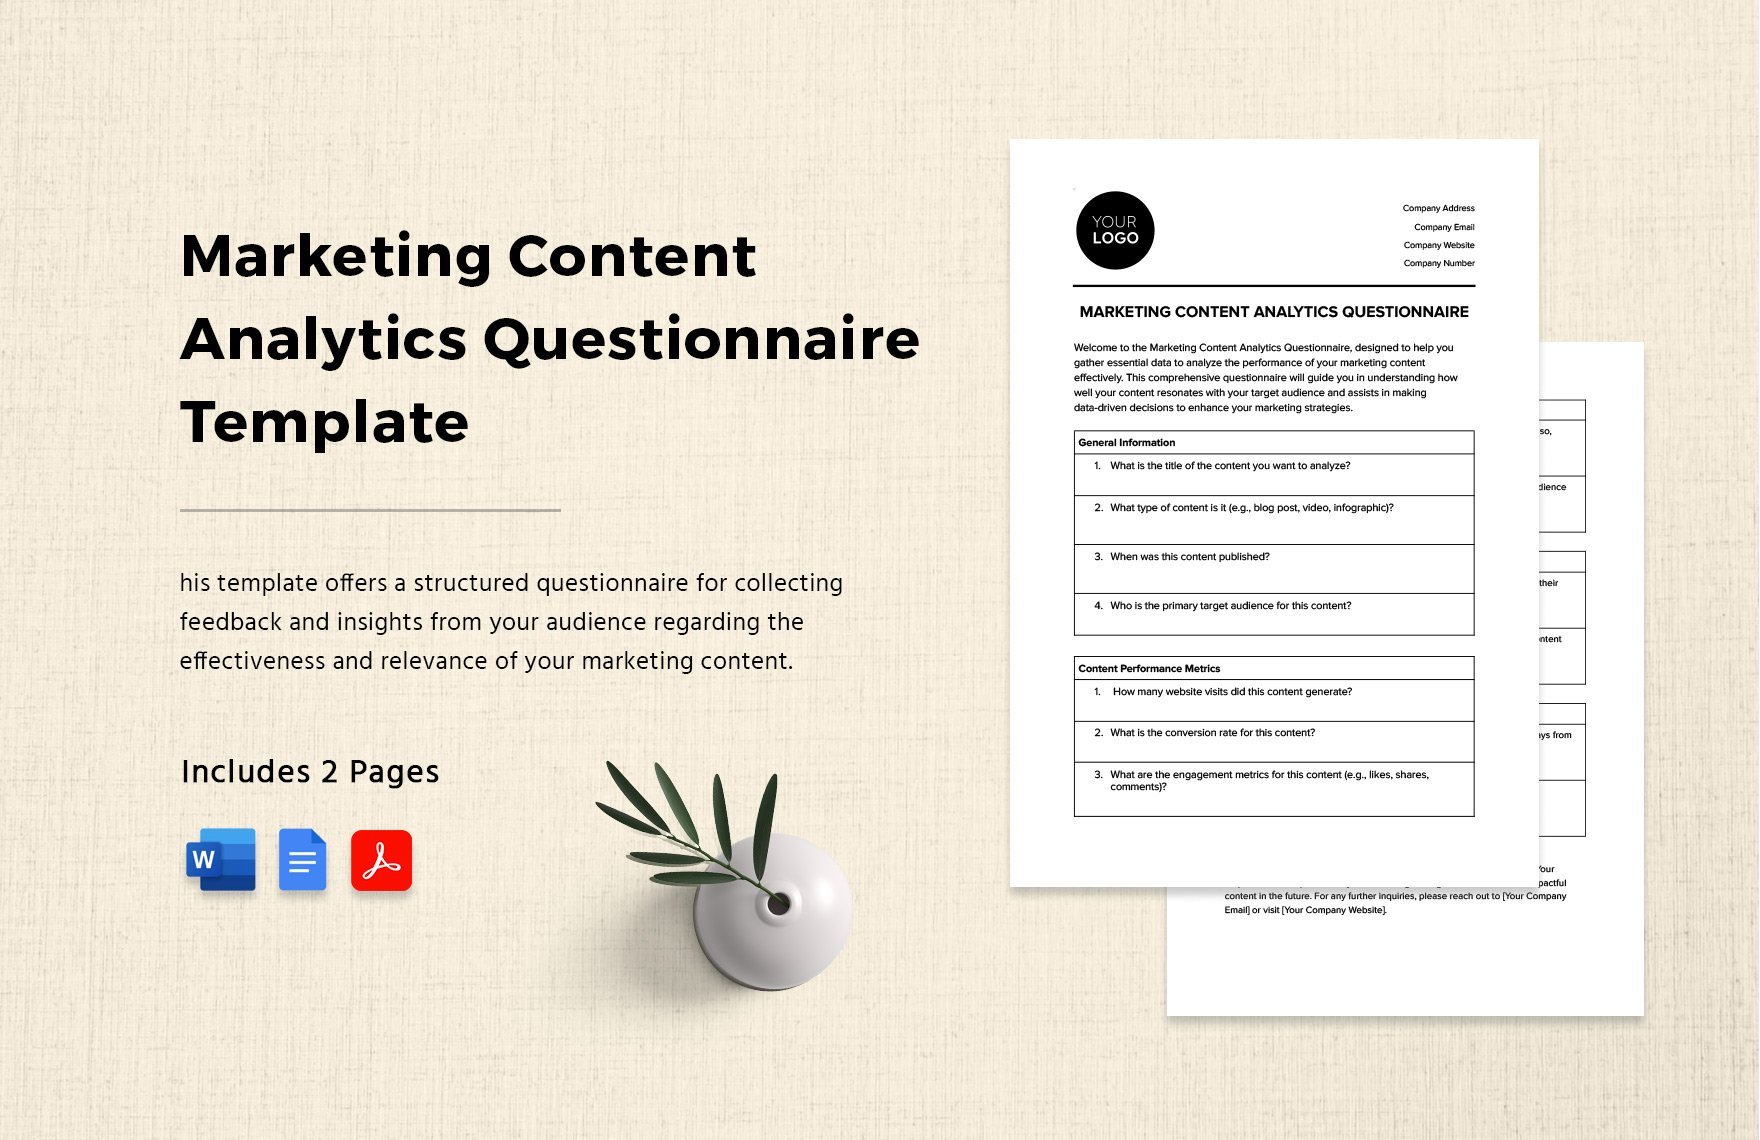  Marketing Content Analytics Questionnaire Template